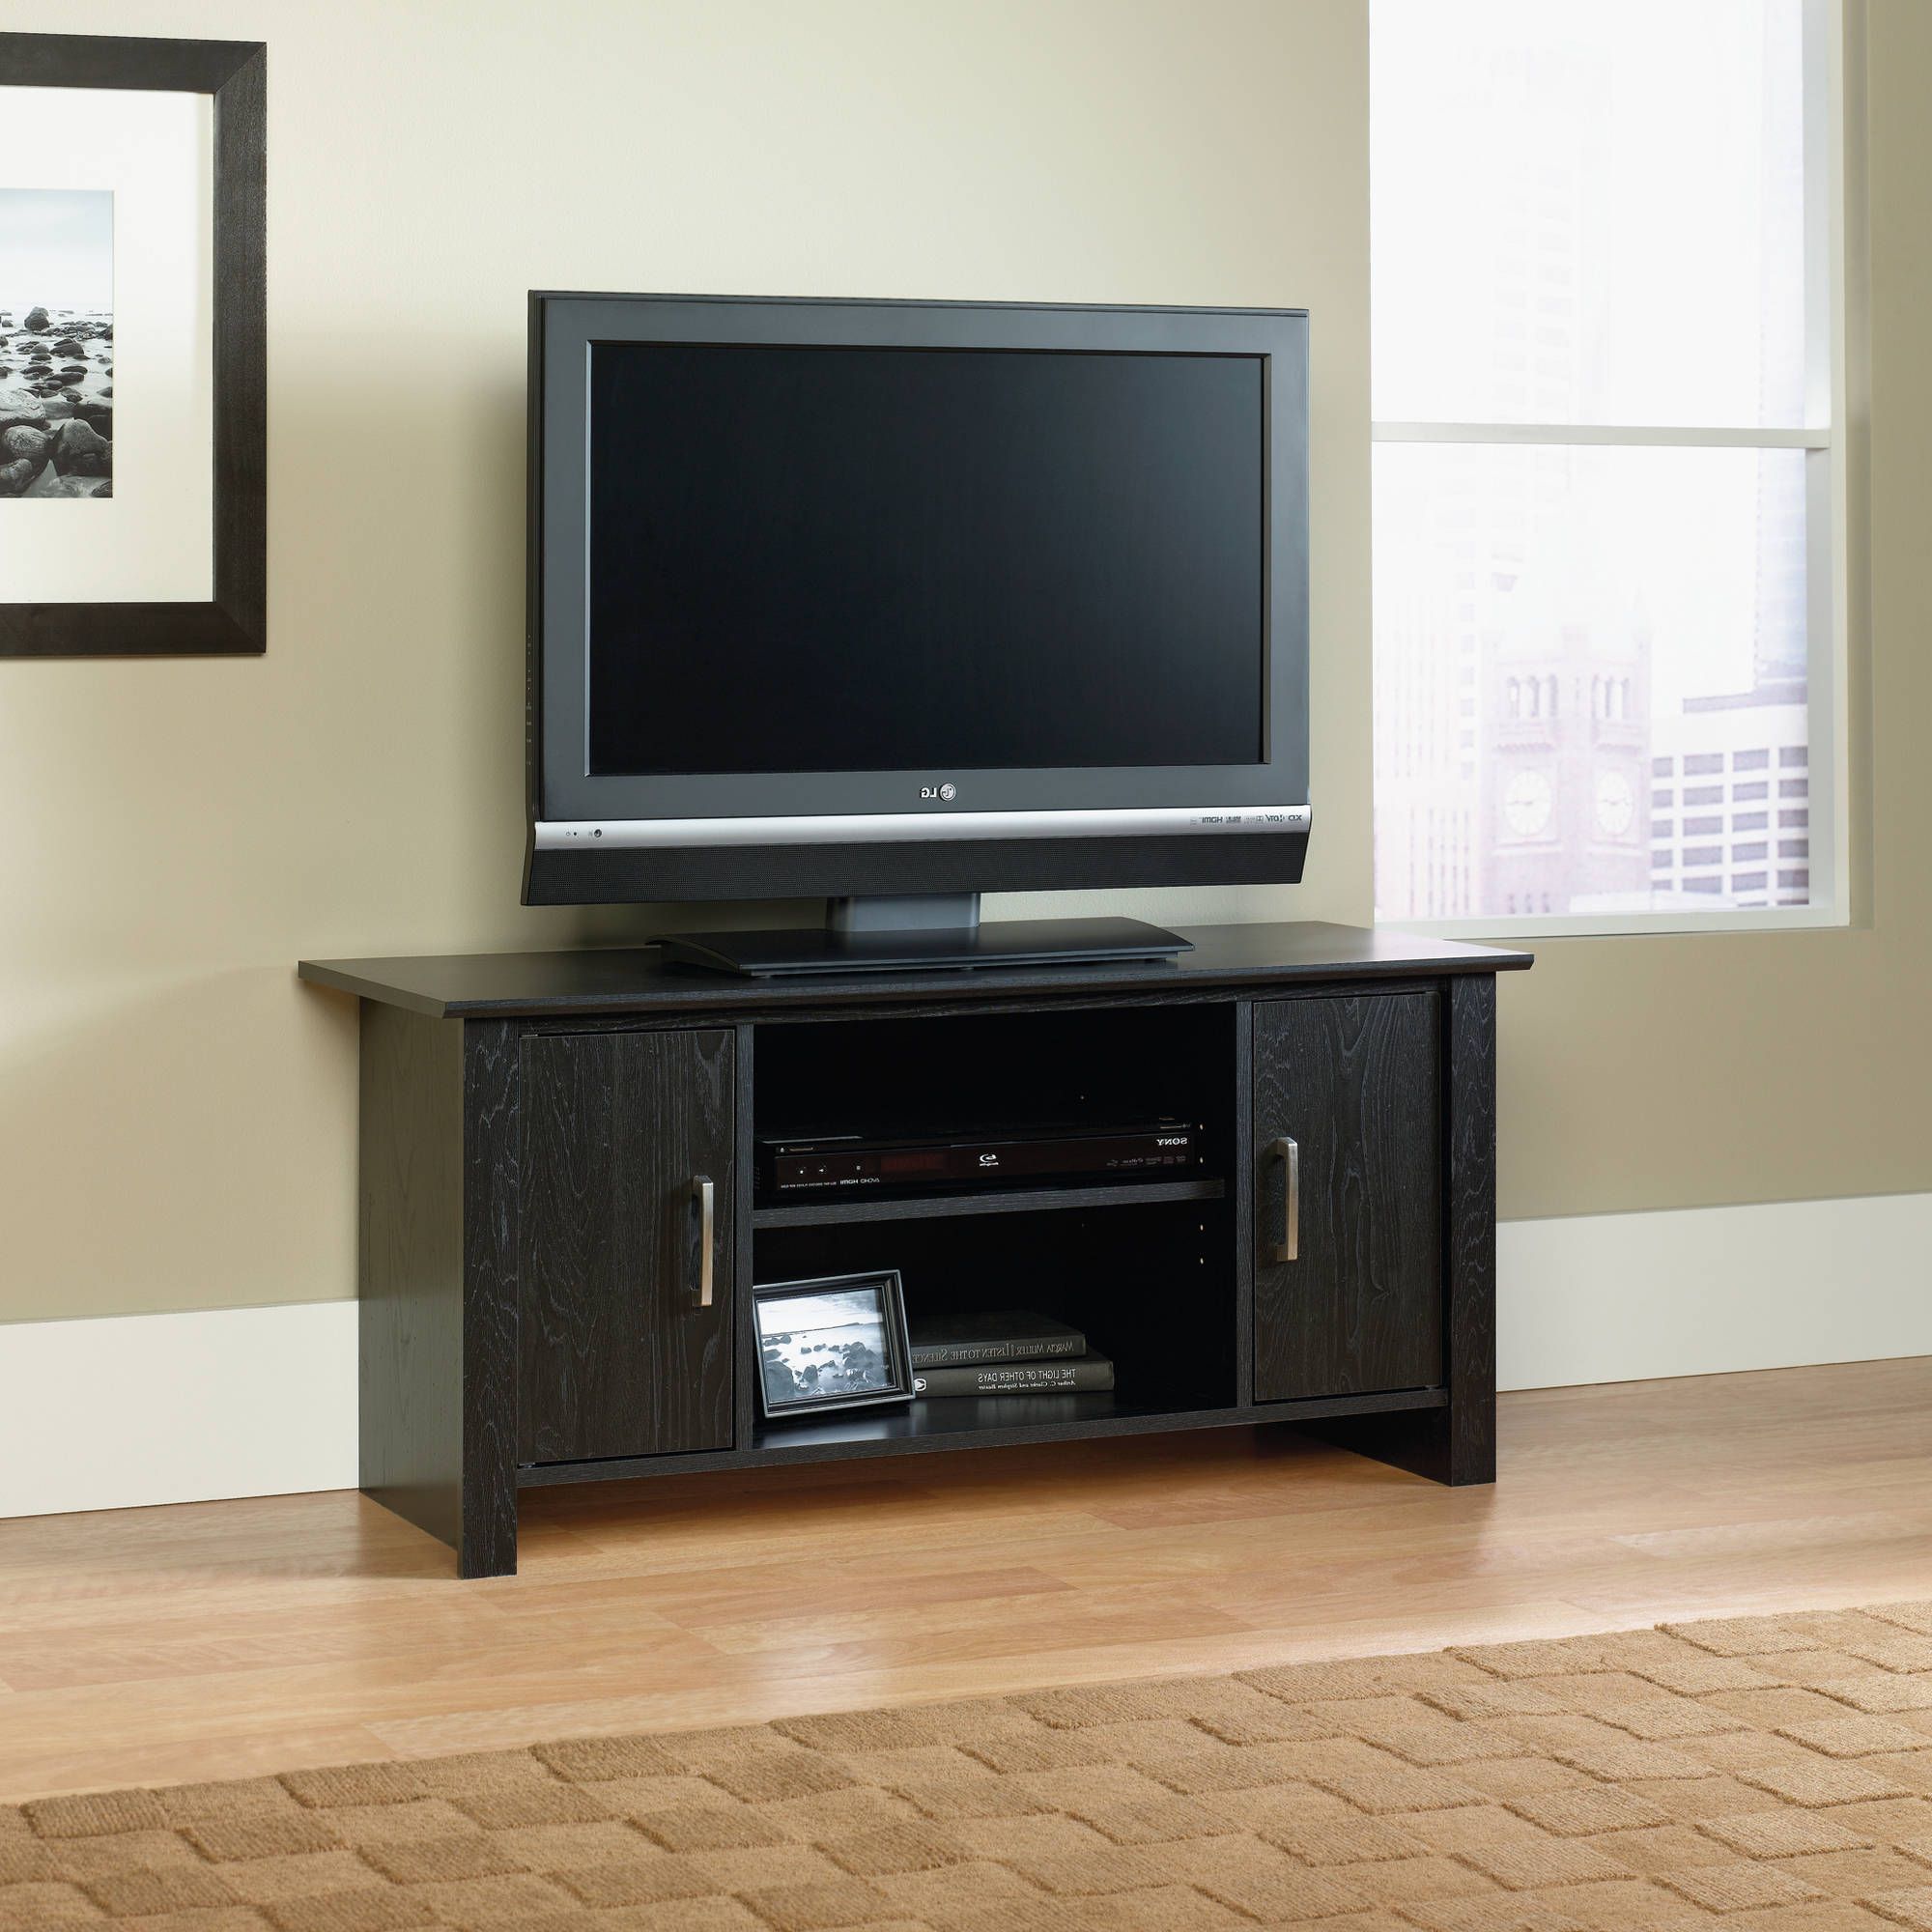 Newest Tv Stands Best Buy Whalen Stand Walmart With Mount 65 Inch 50 For 43 With Tv Stands For 43 Inch Tv (View 4 of 20)